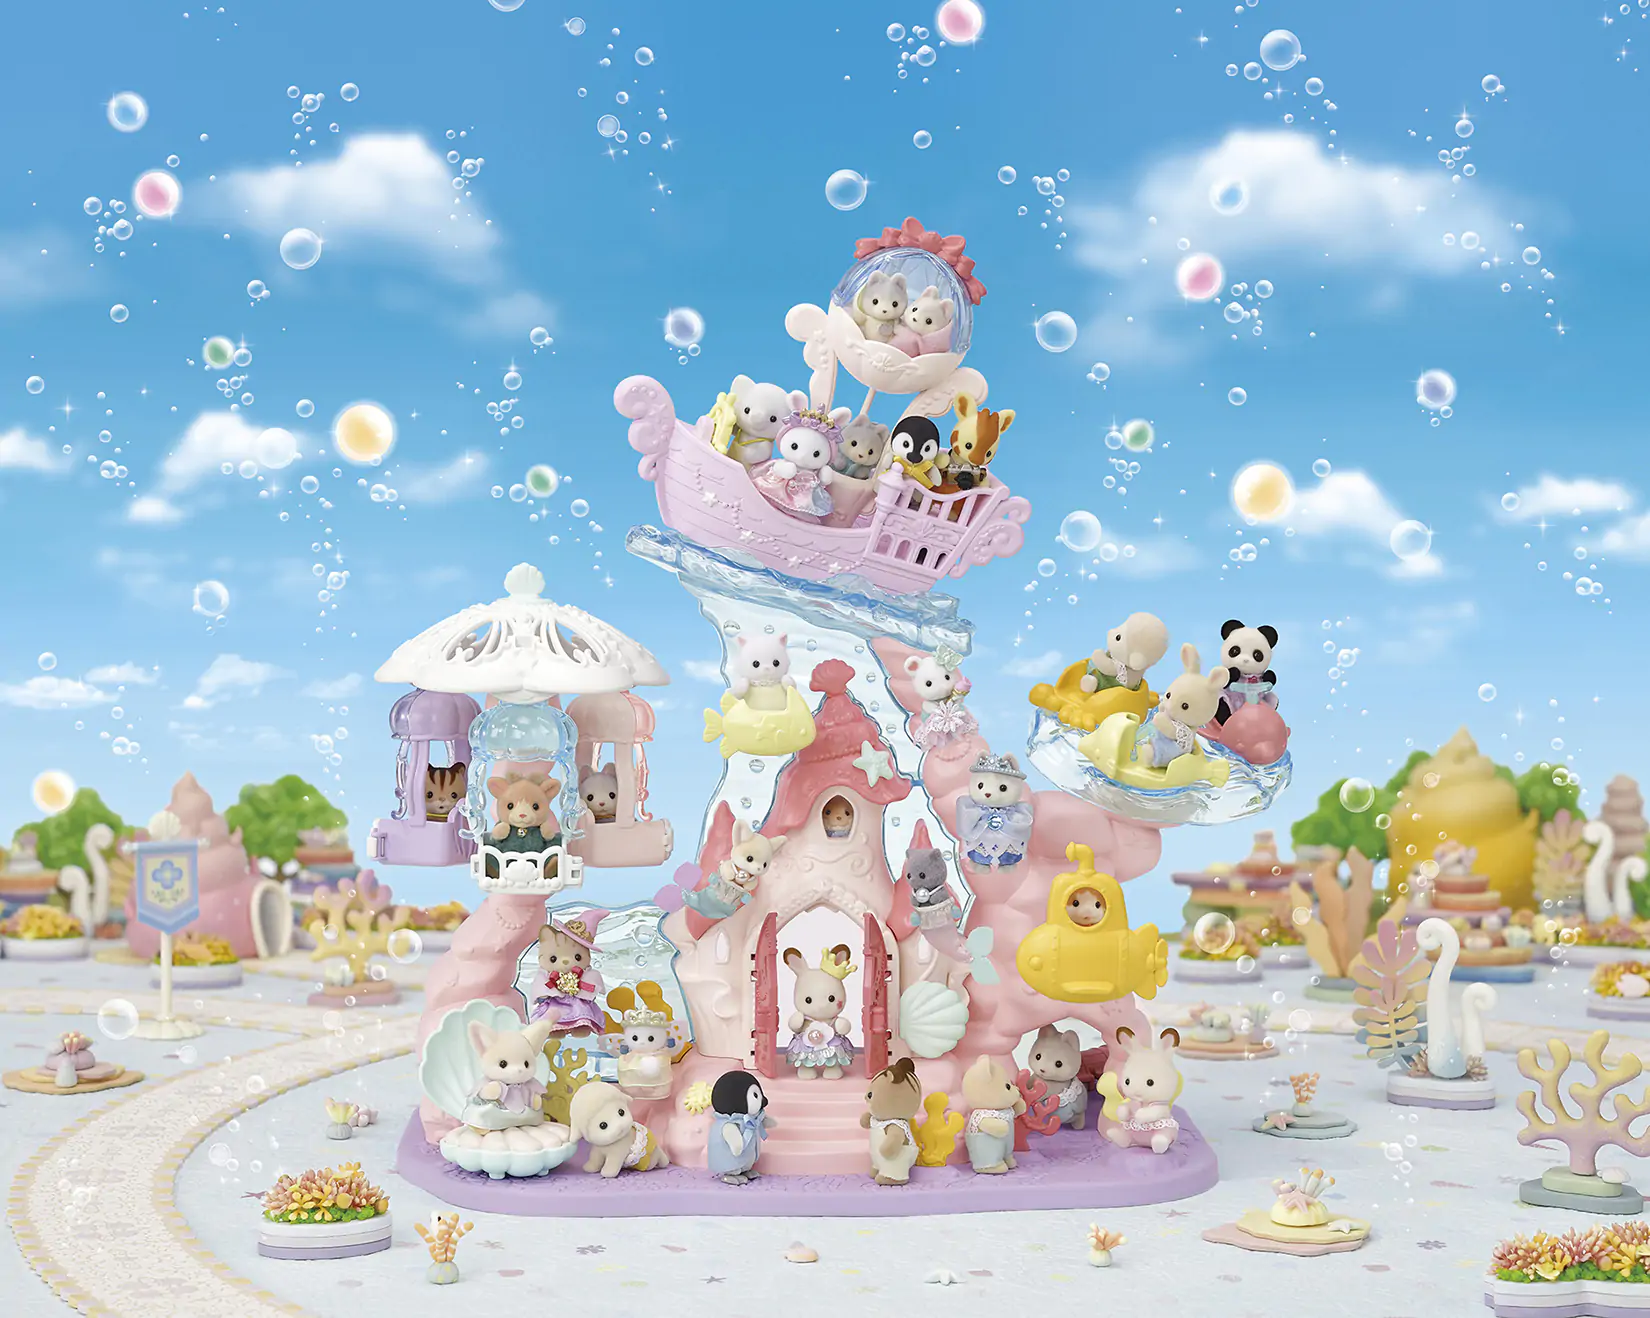 Discover the Baby Mermaid Castle!